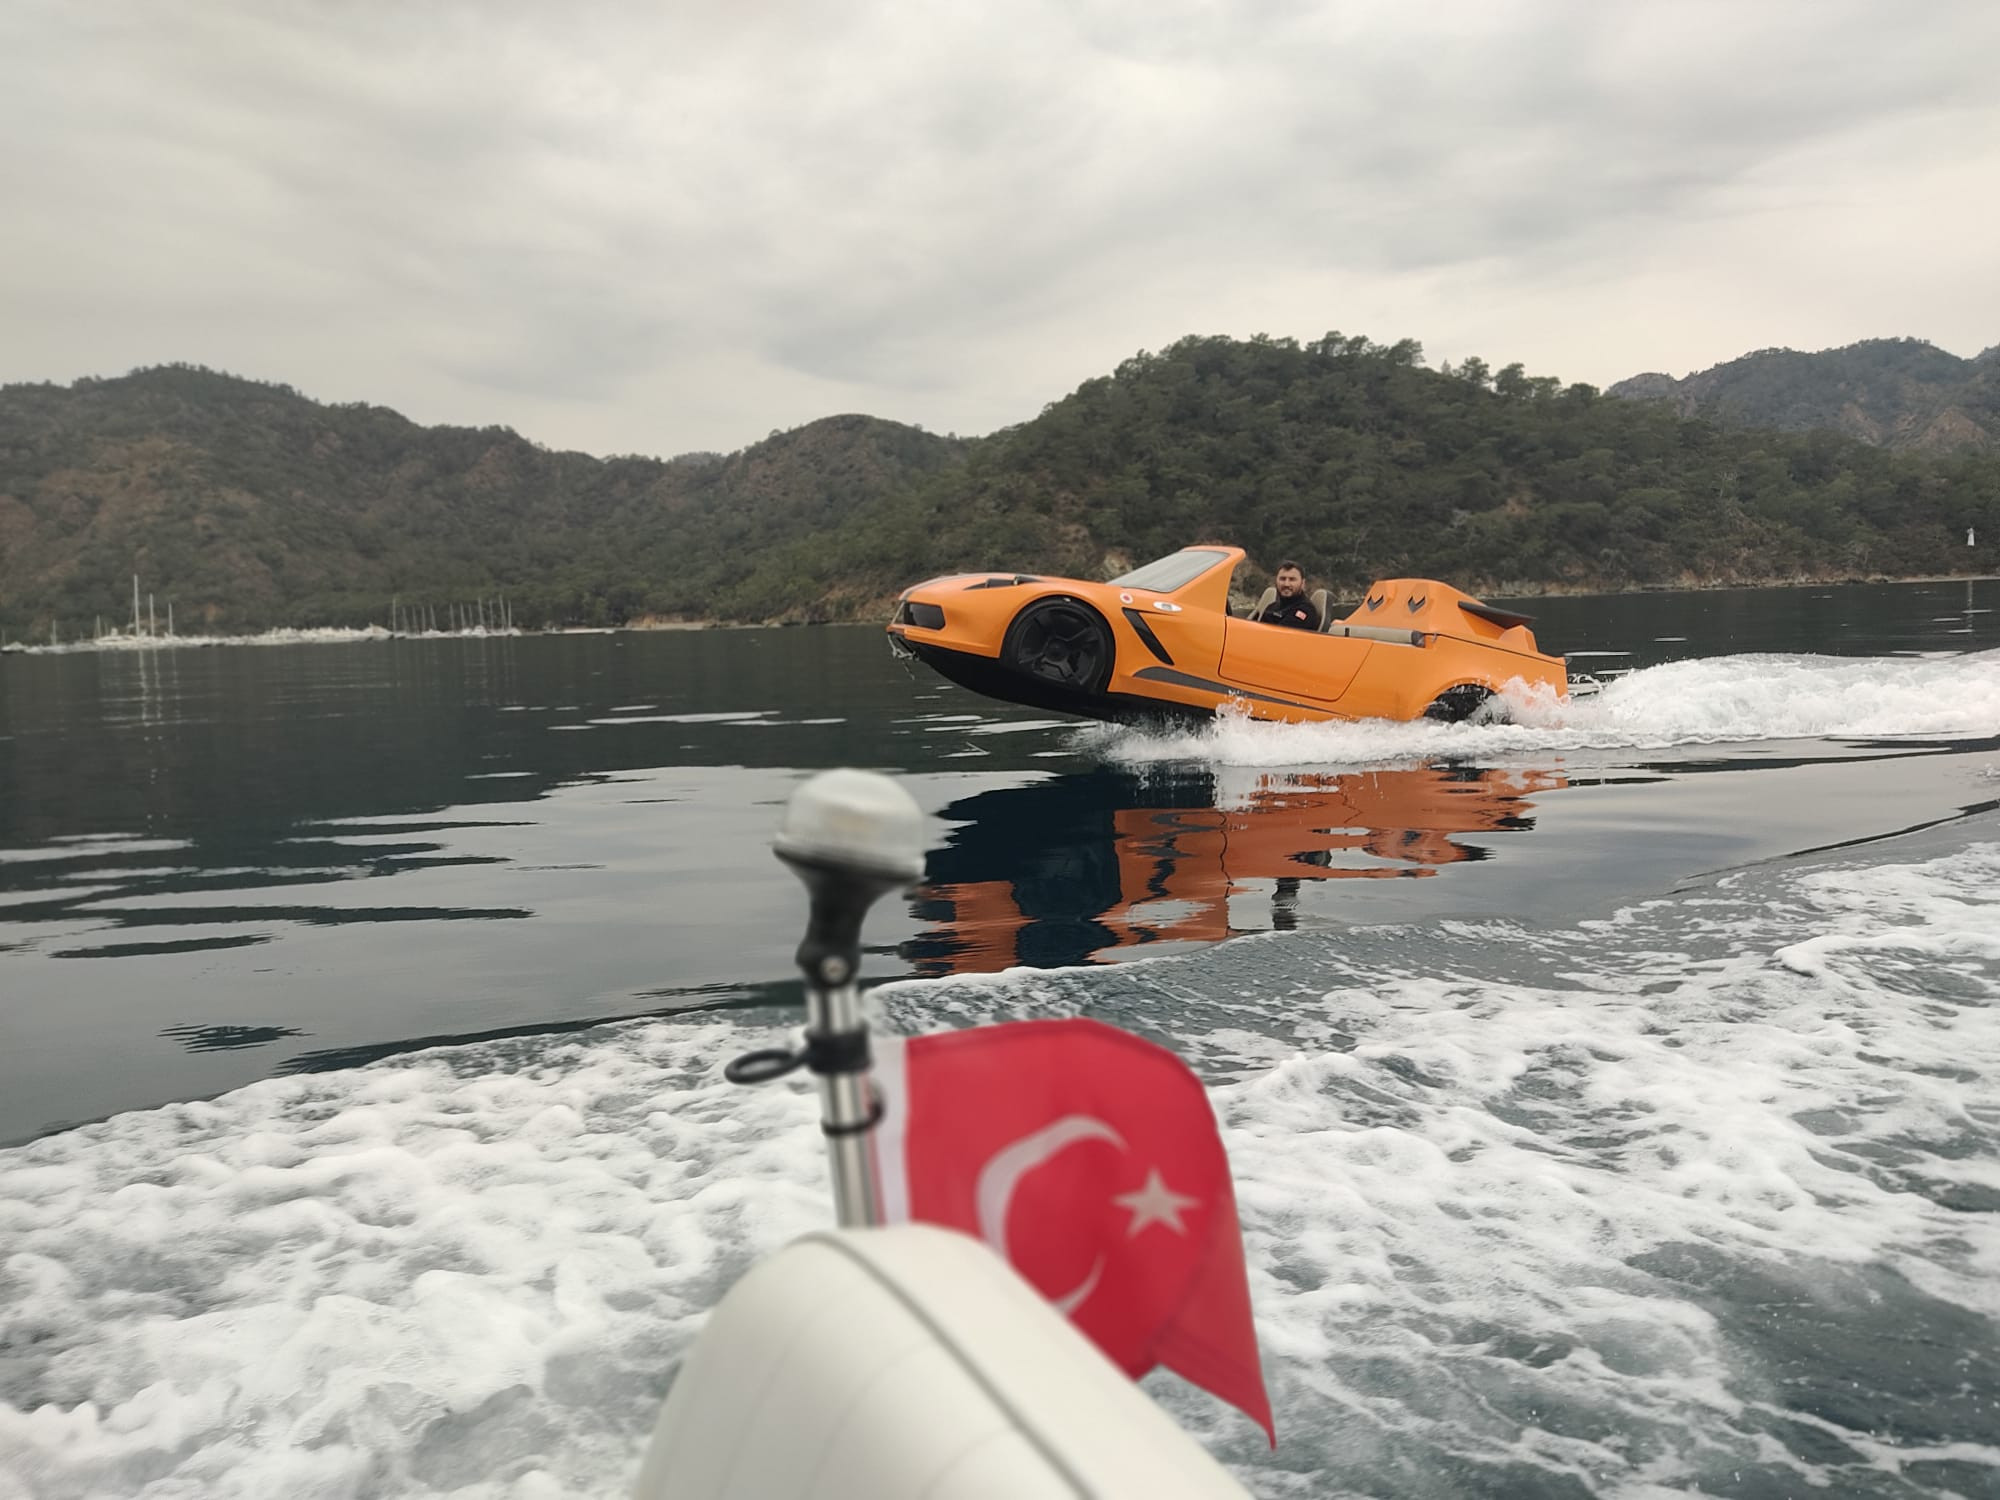 Jetcar, a revolutionary drivable car on water